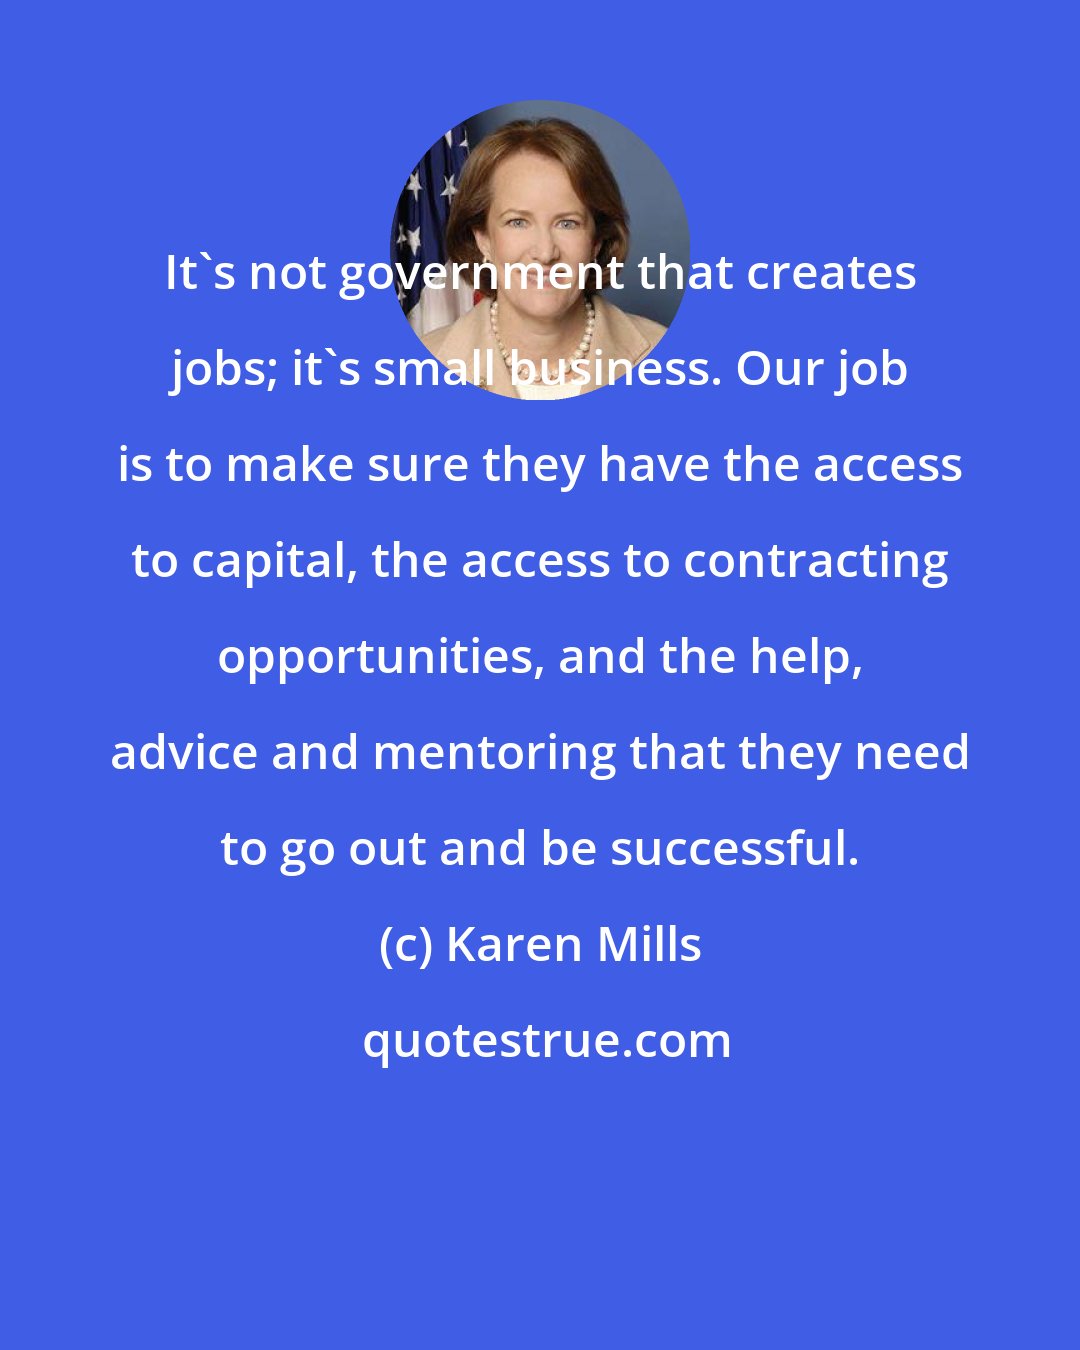 Karen Mills: It's not government that creates jobs; it's small business. Our job is to make sure they have the access to capital, the access to contracting opportunities, and the help, advice and mentoring that they need to go out and be successful.